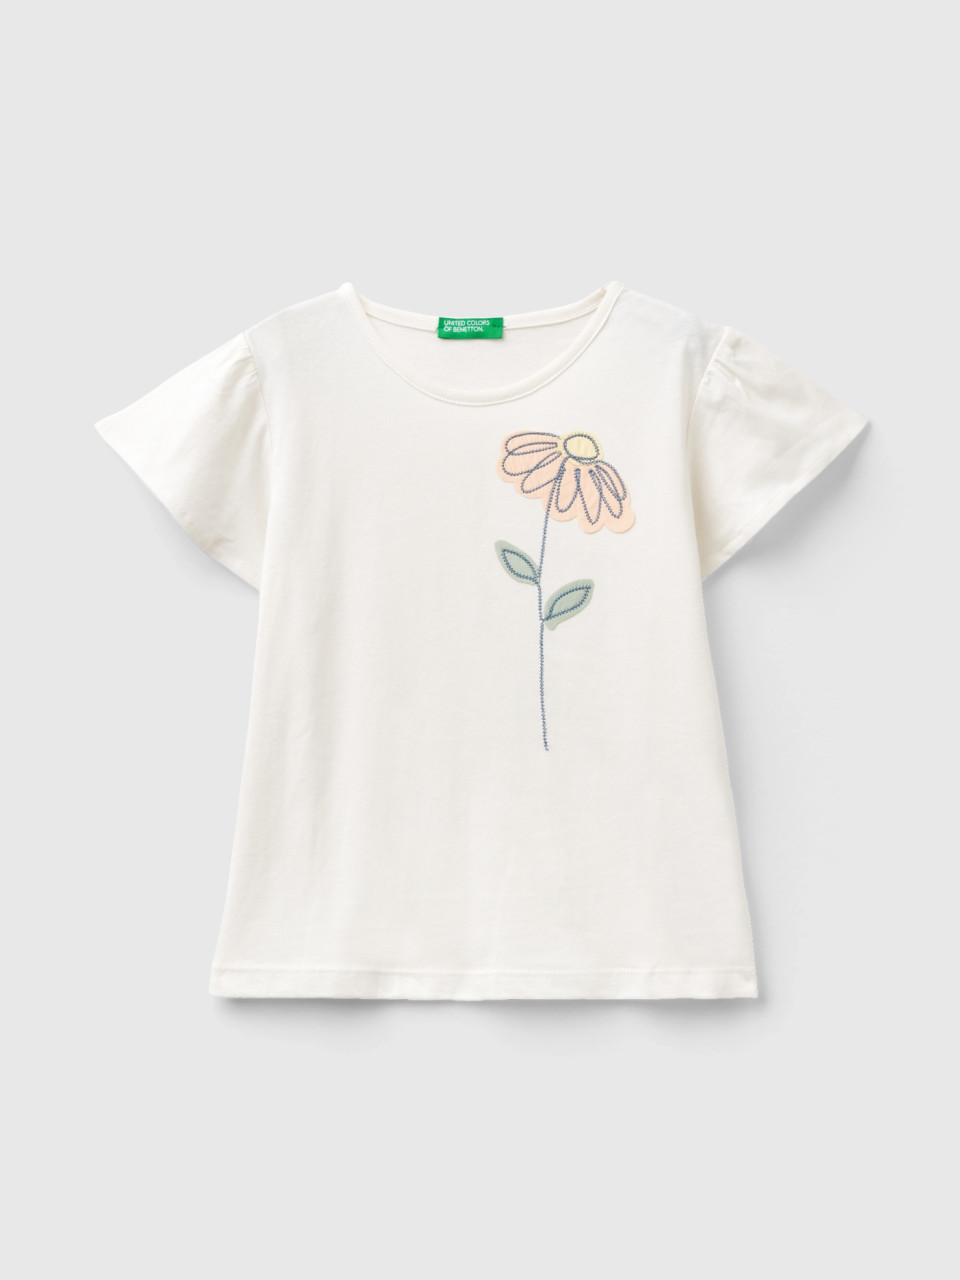 Benetton, T-shirt With Floral Embroidery, Creamy White, Kids